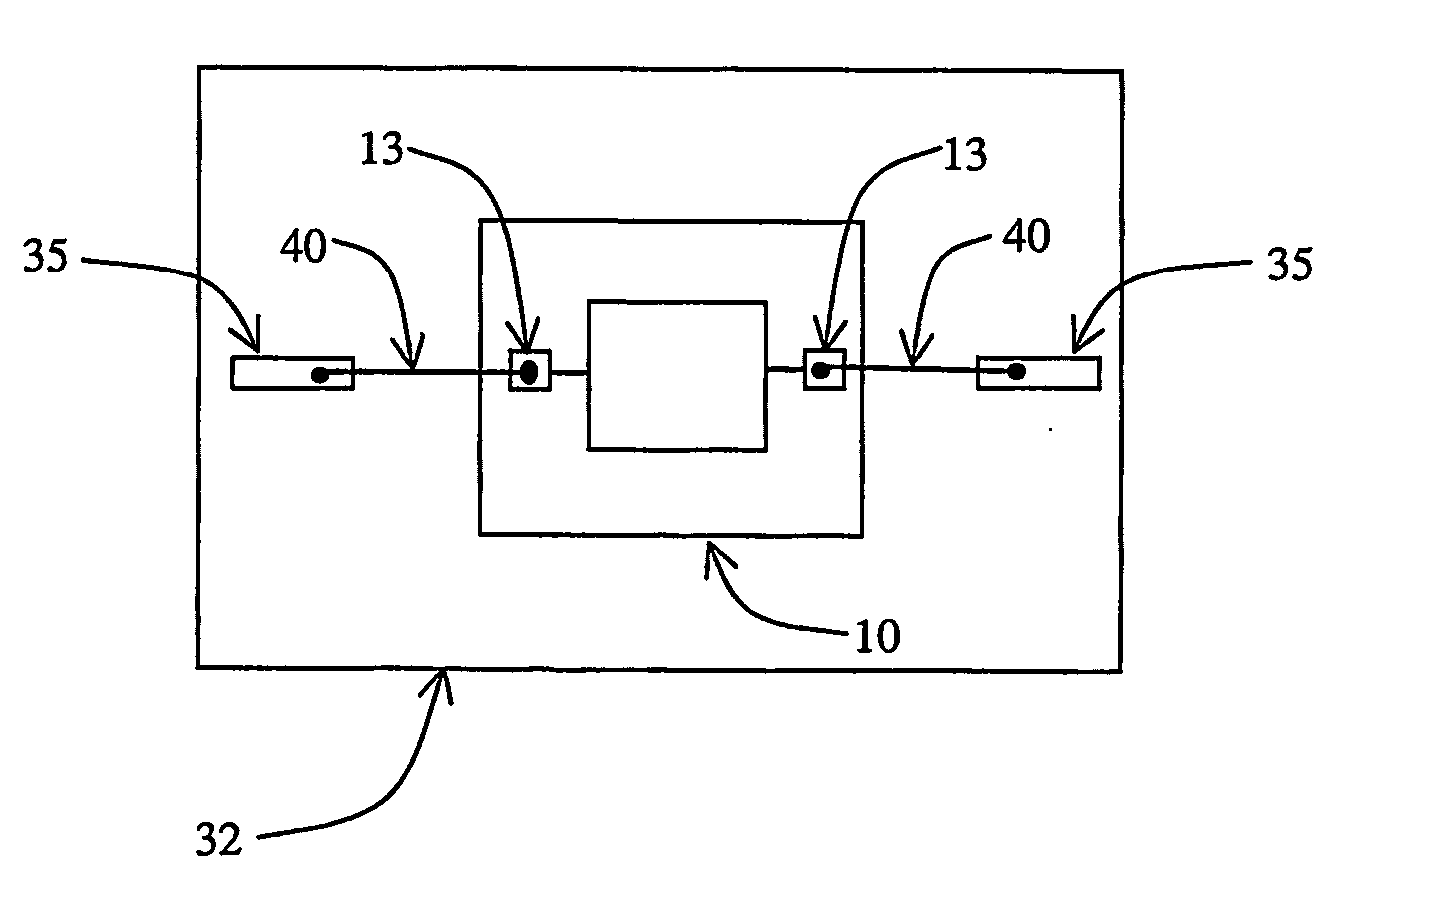 Interconnect apparatus and methods